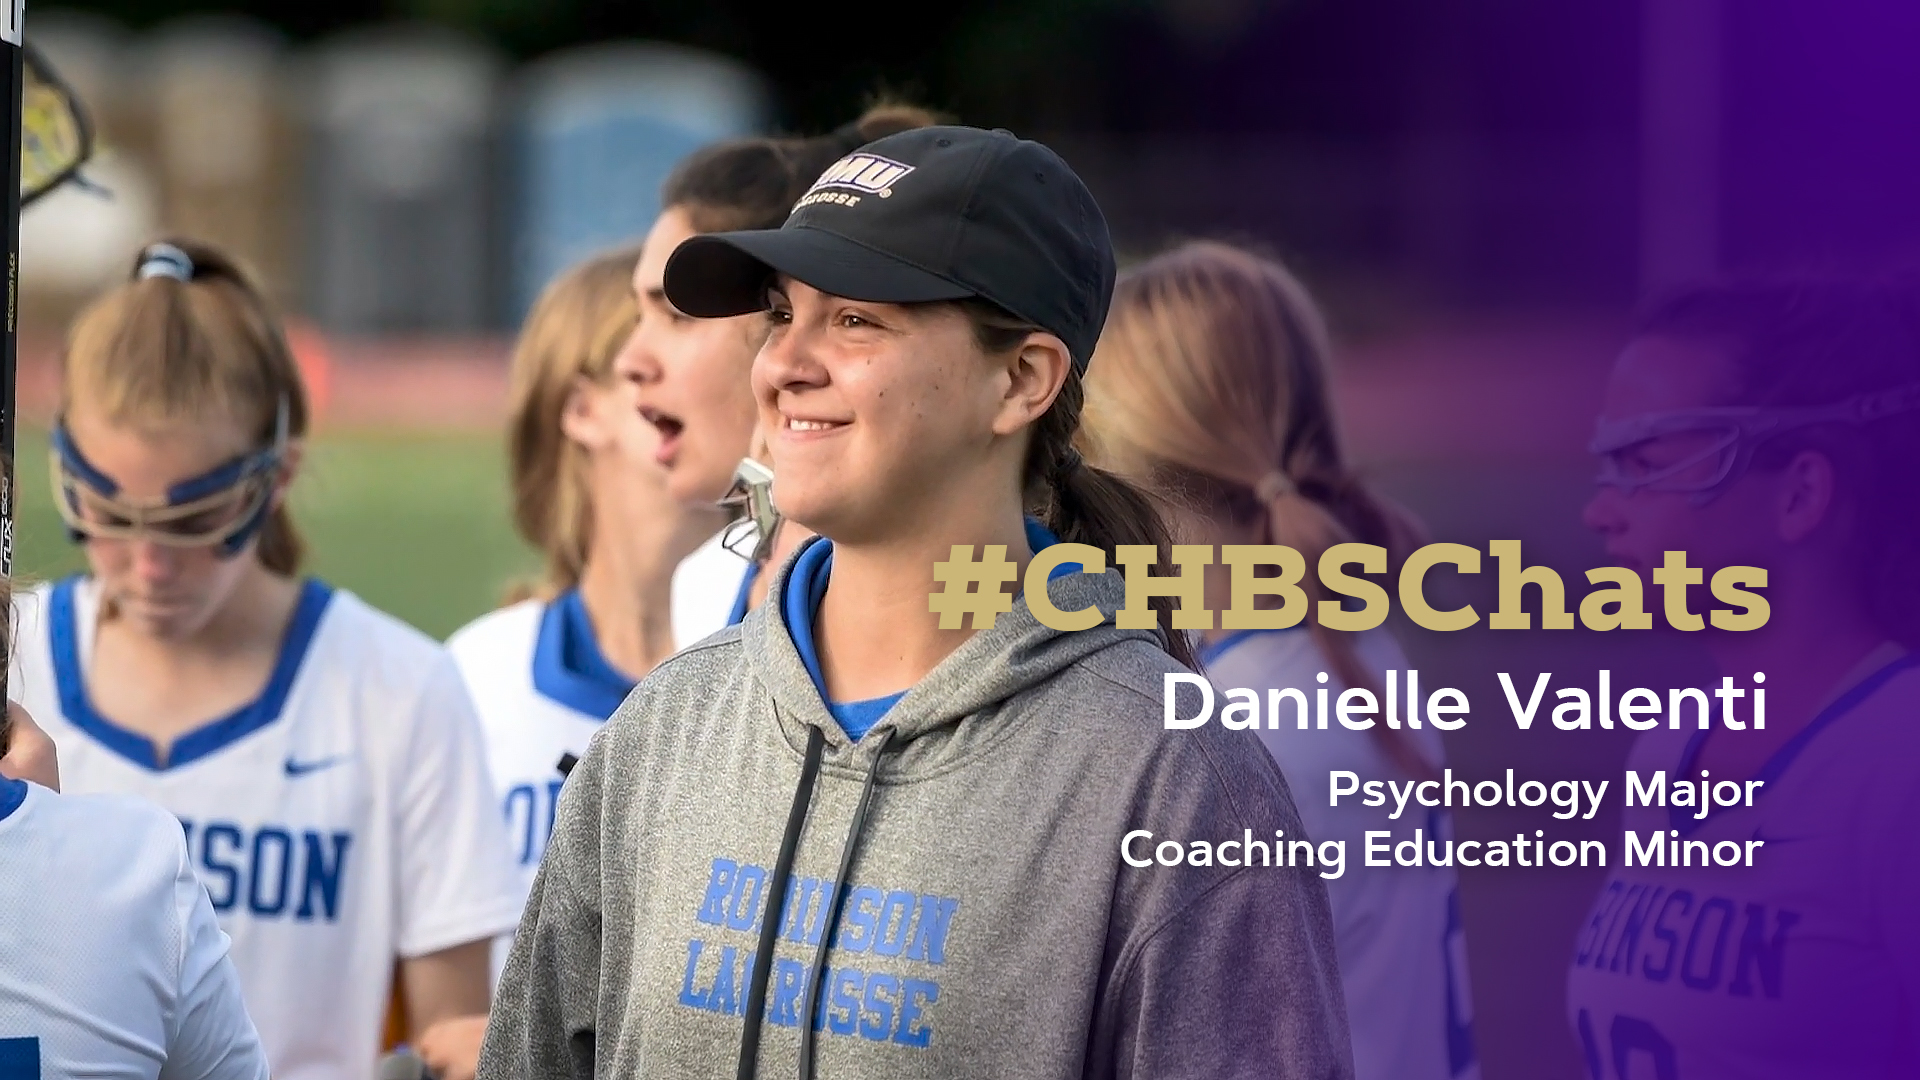 Video: chbs chats with danielle valenti